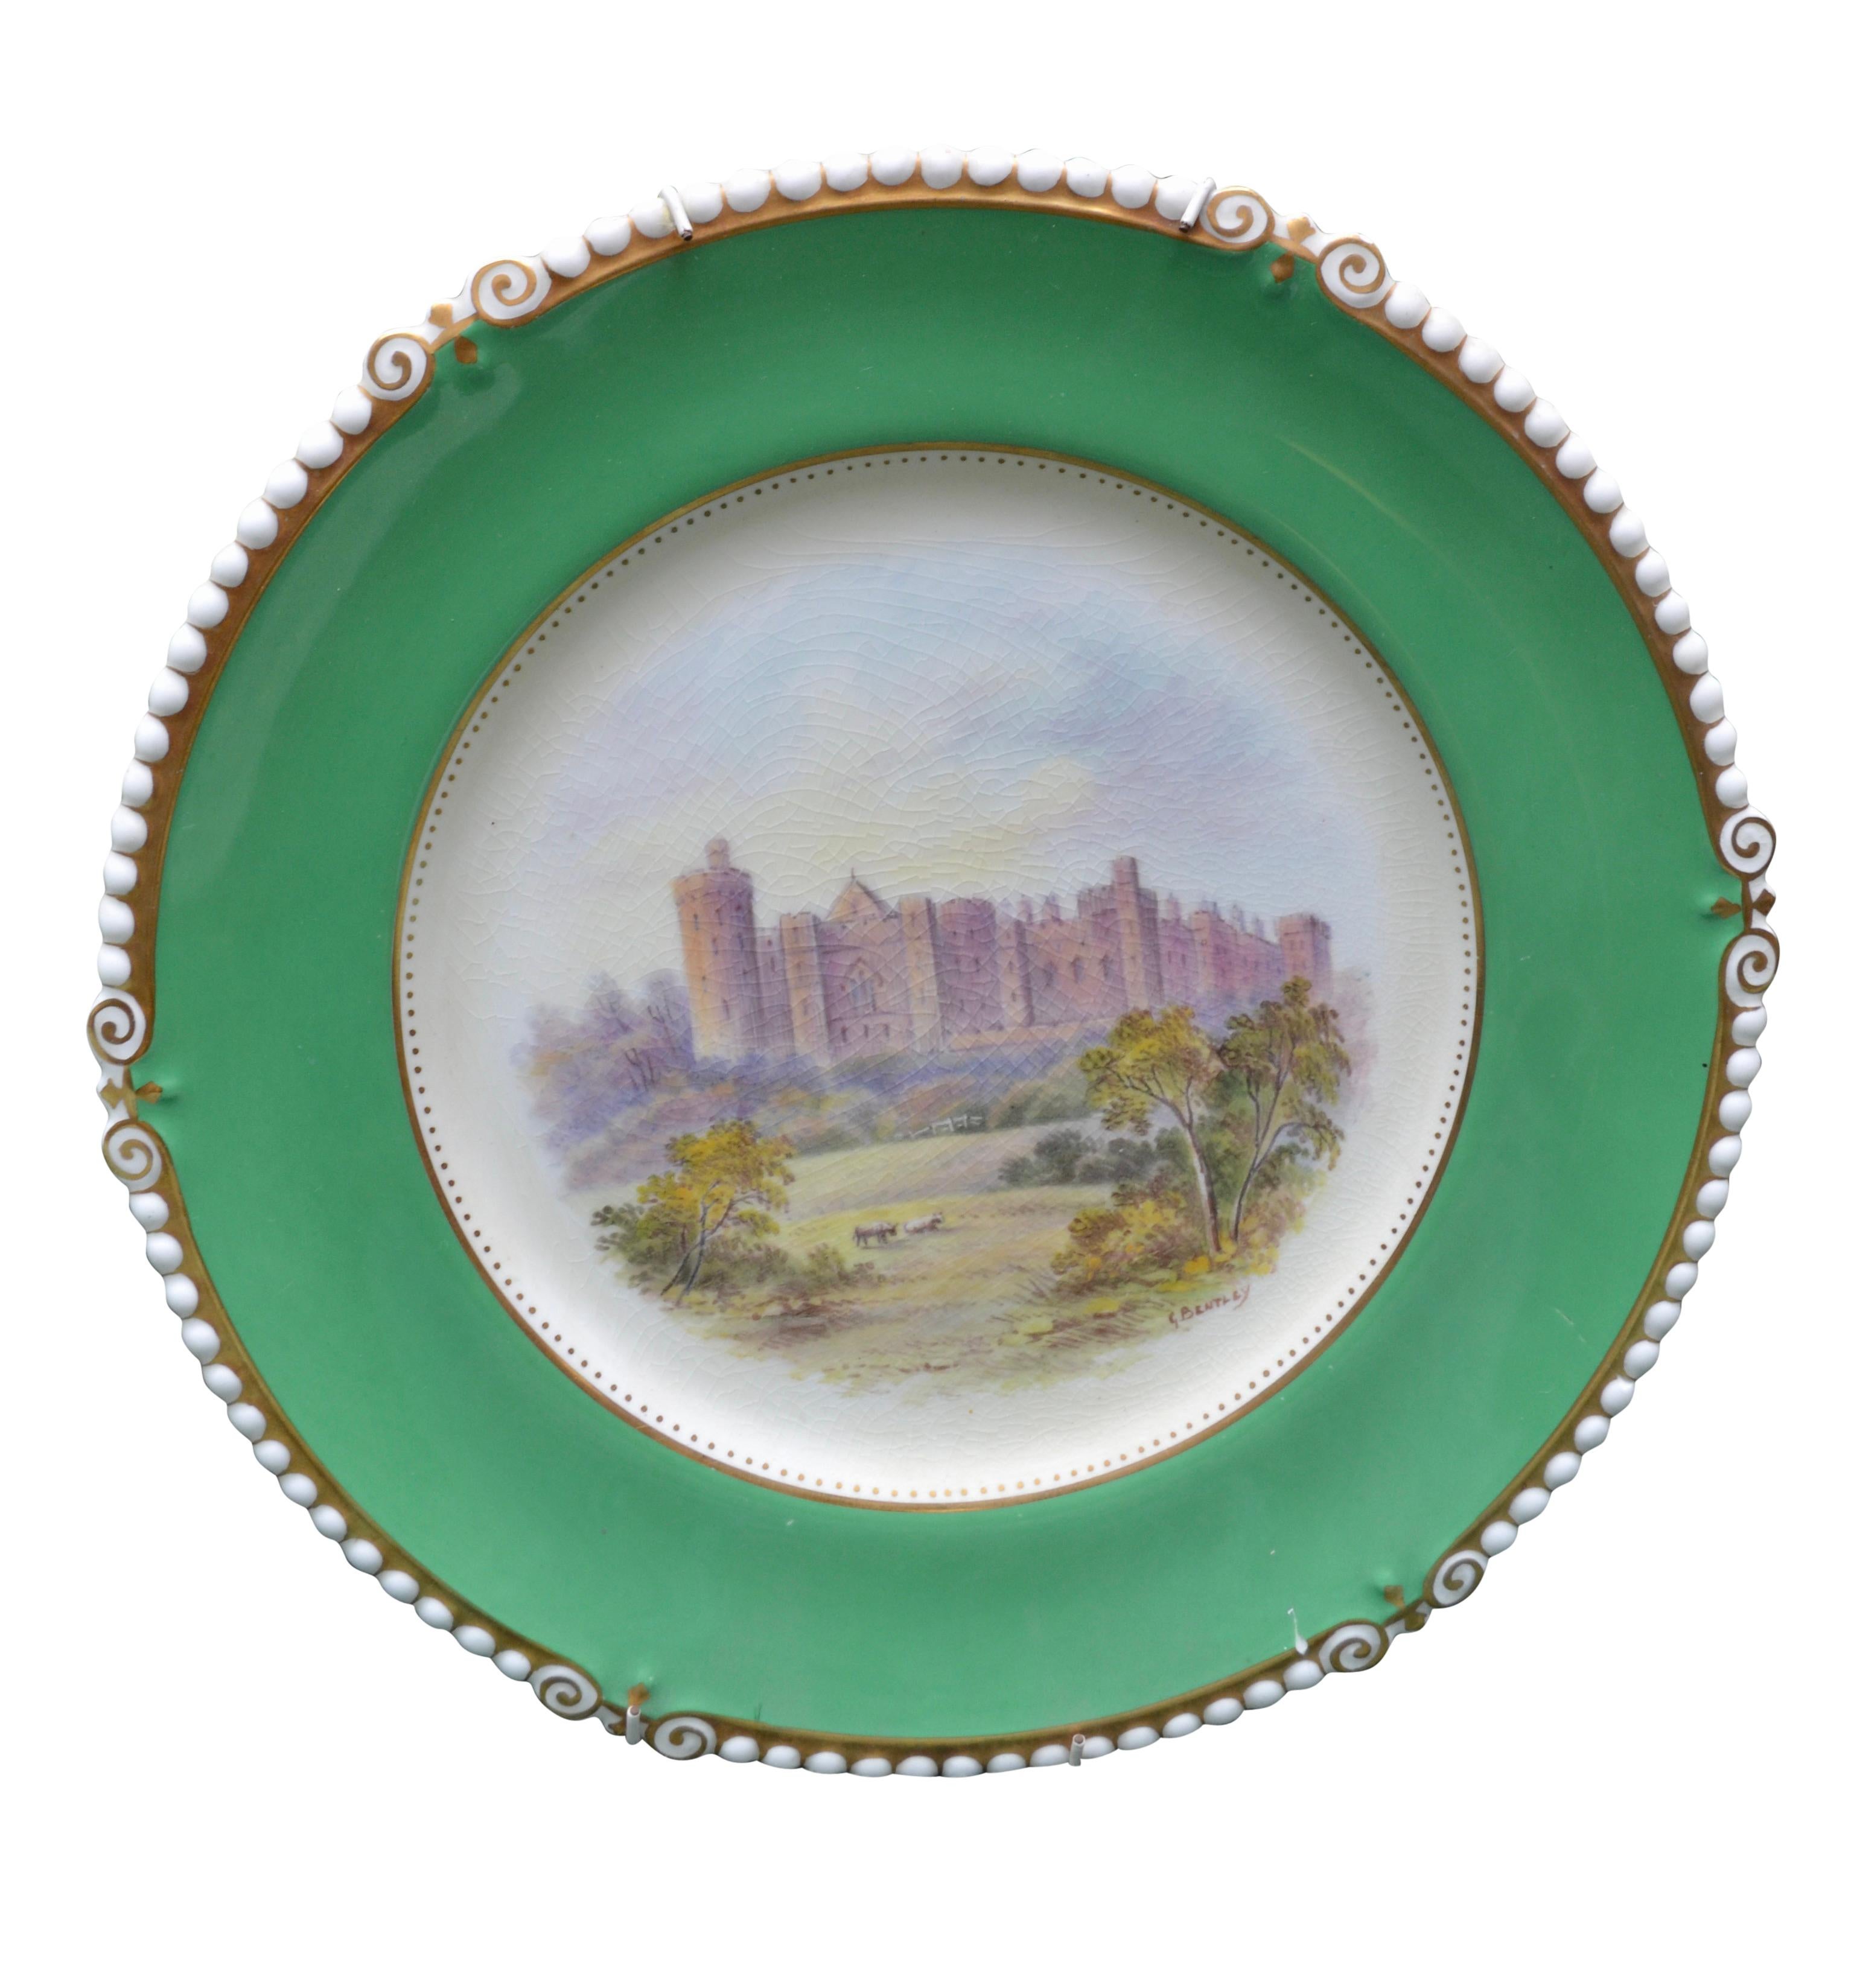 A set of three late Victorian Aynsley bone china wall plates with a light green border centered with hand painted images of Arundel Castle in England, Balmoral in Scotland and Harlech in Wales all signed G. Bentley.  

Arundel Castle is a  medieval